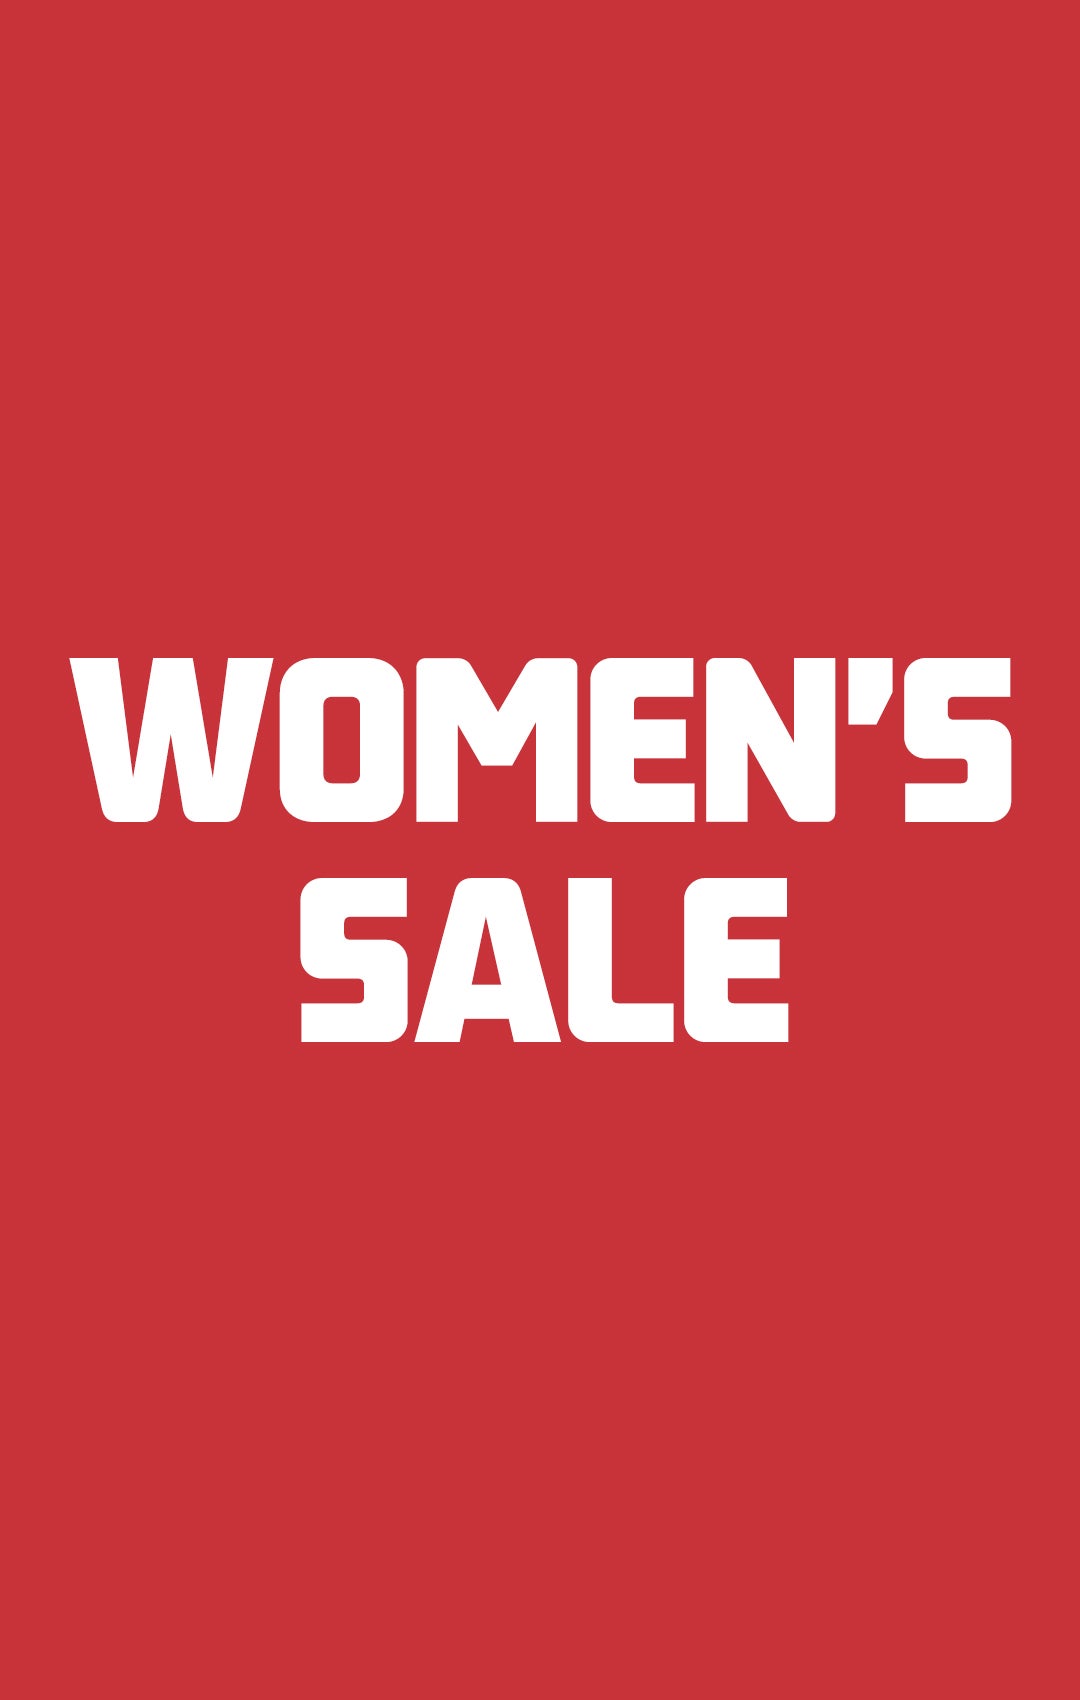 Sale Shoes, Clothing, Accessories, & Equipment